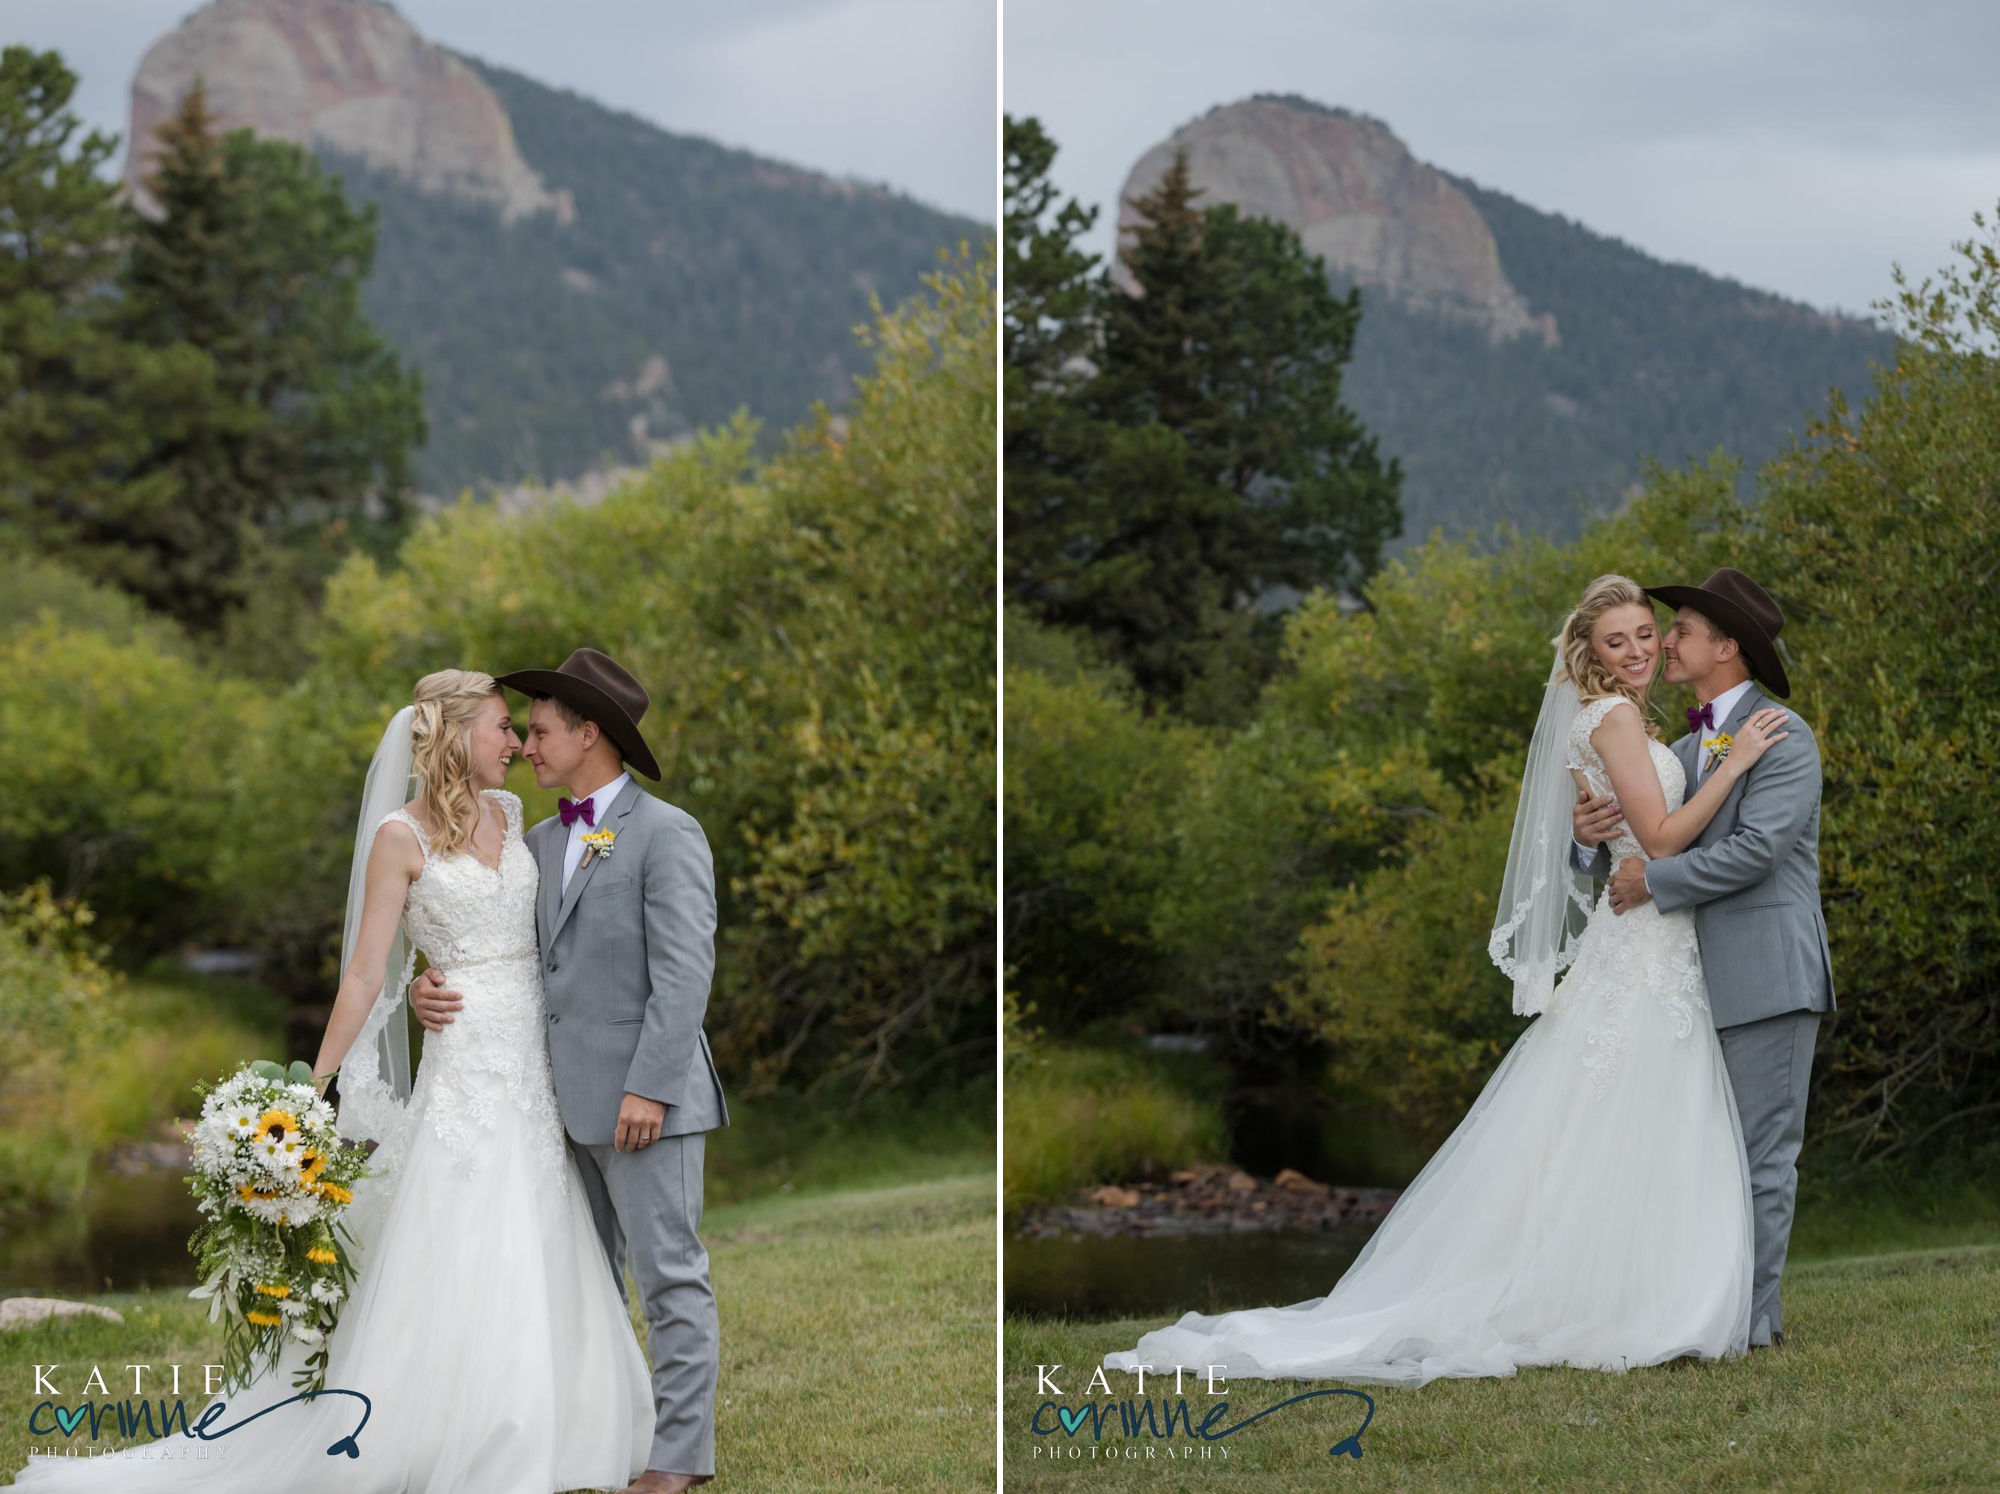 newlywed portraits in front of rocky mountains